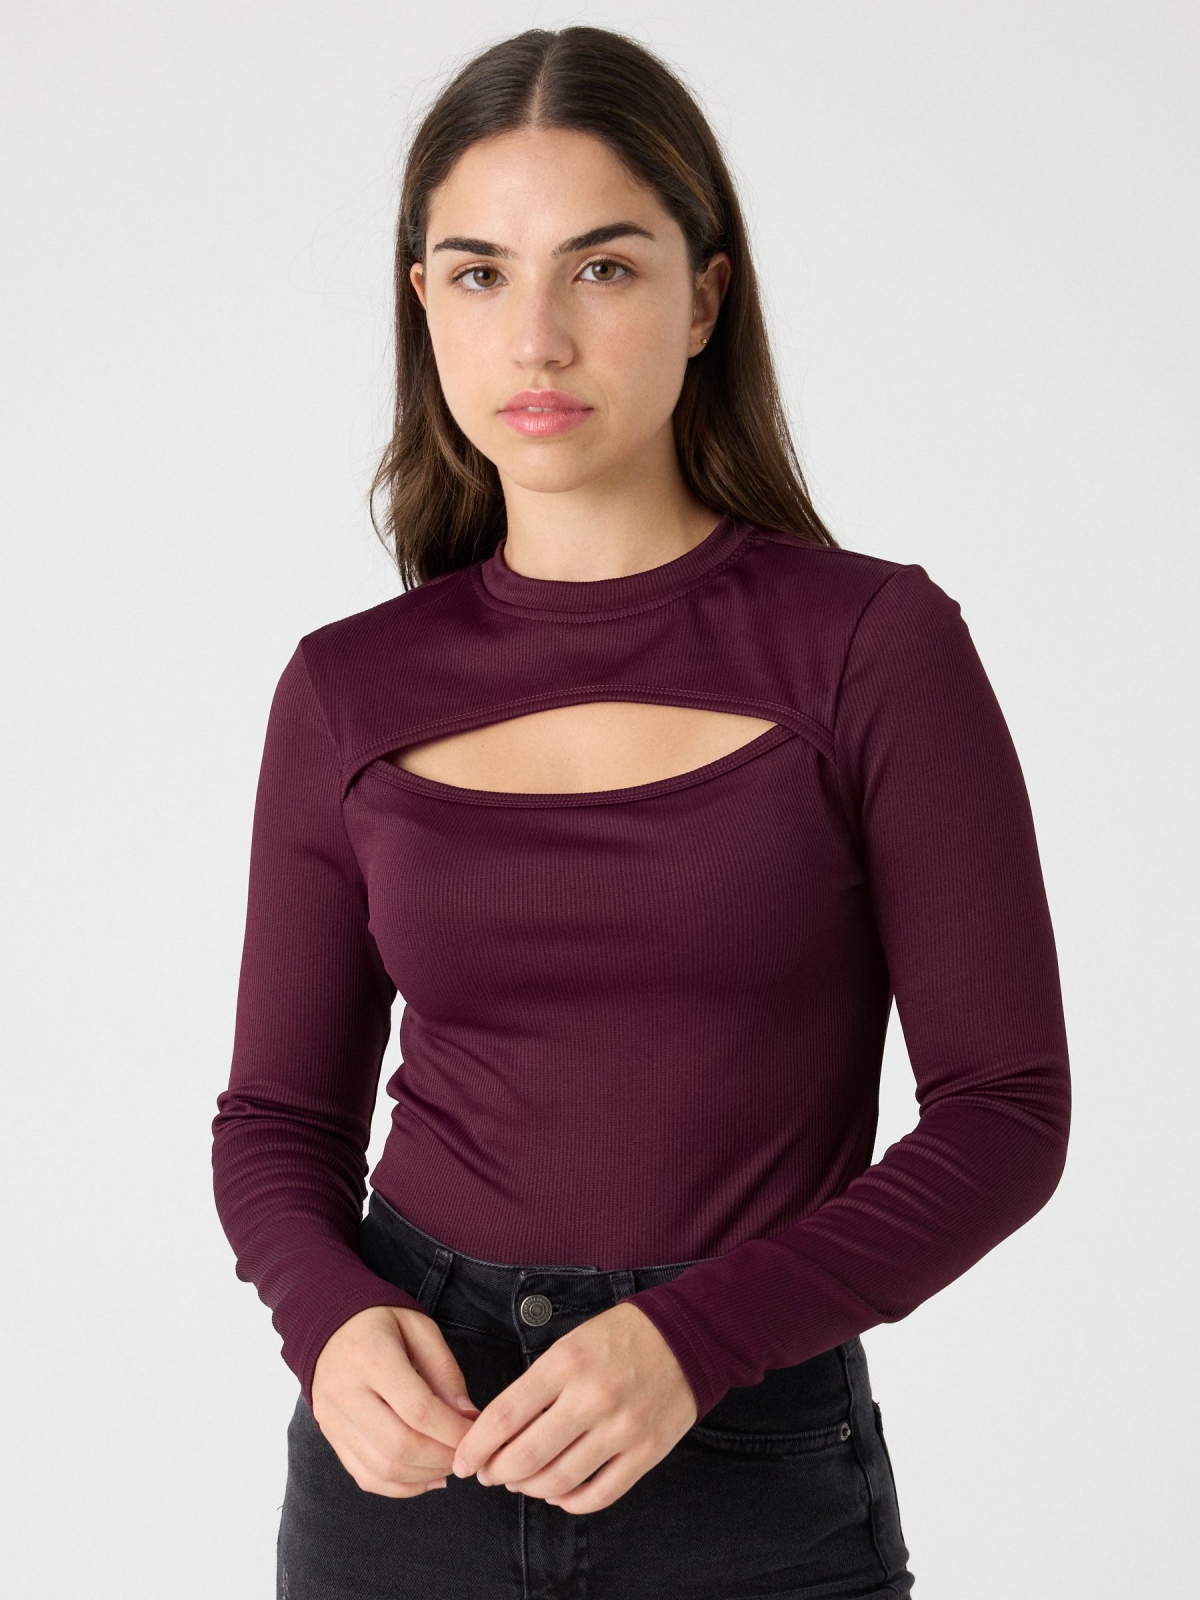 Long-sleeve cut-out ribbed t-shirt aubergine middle front view